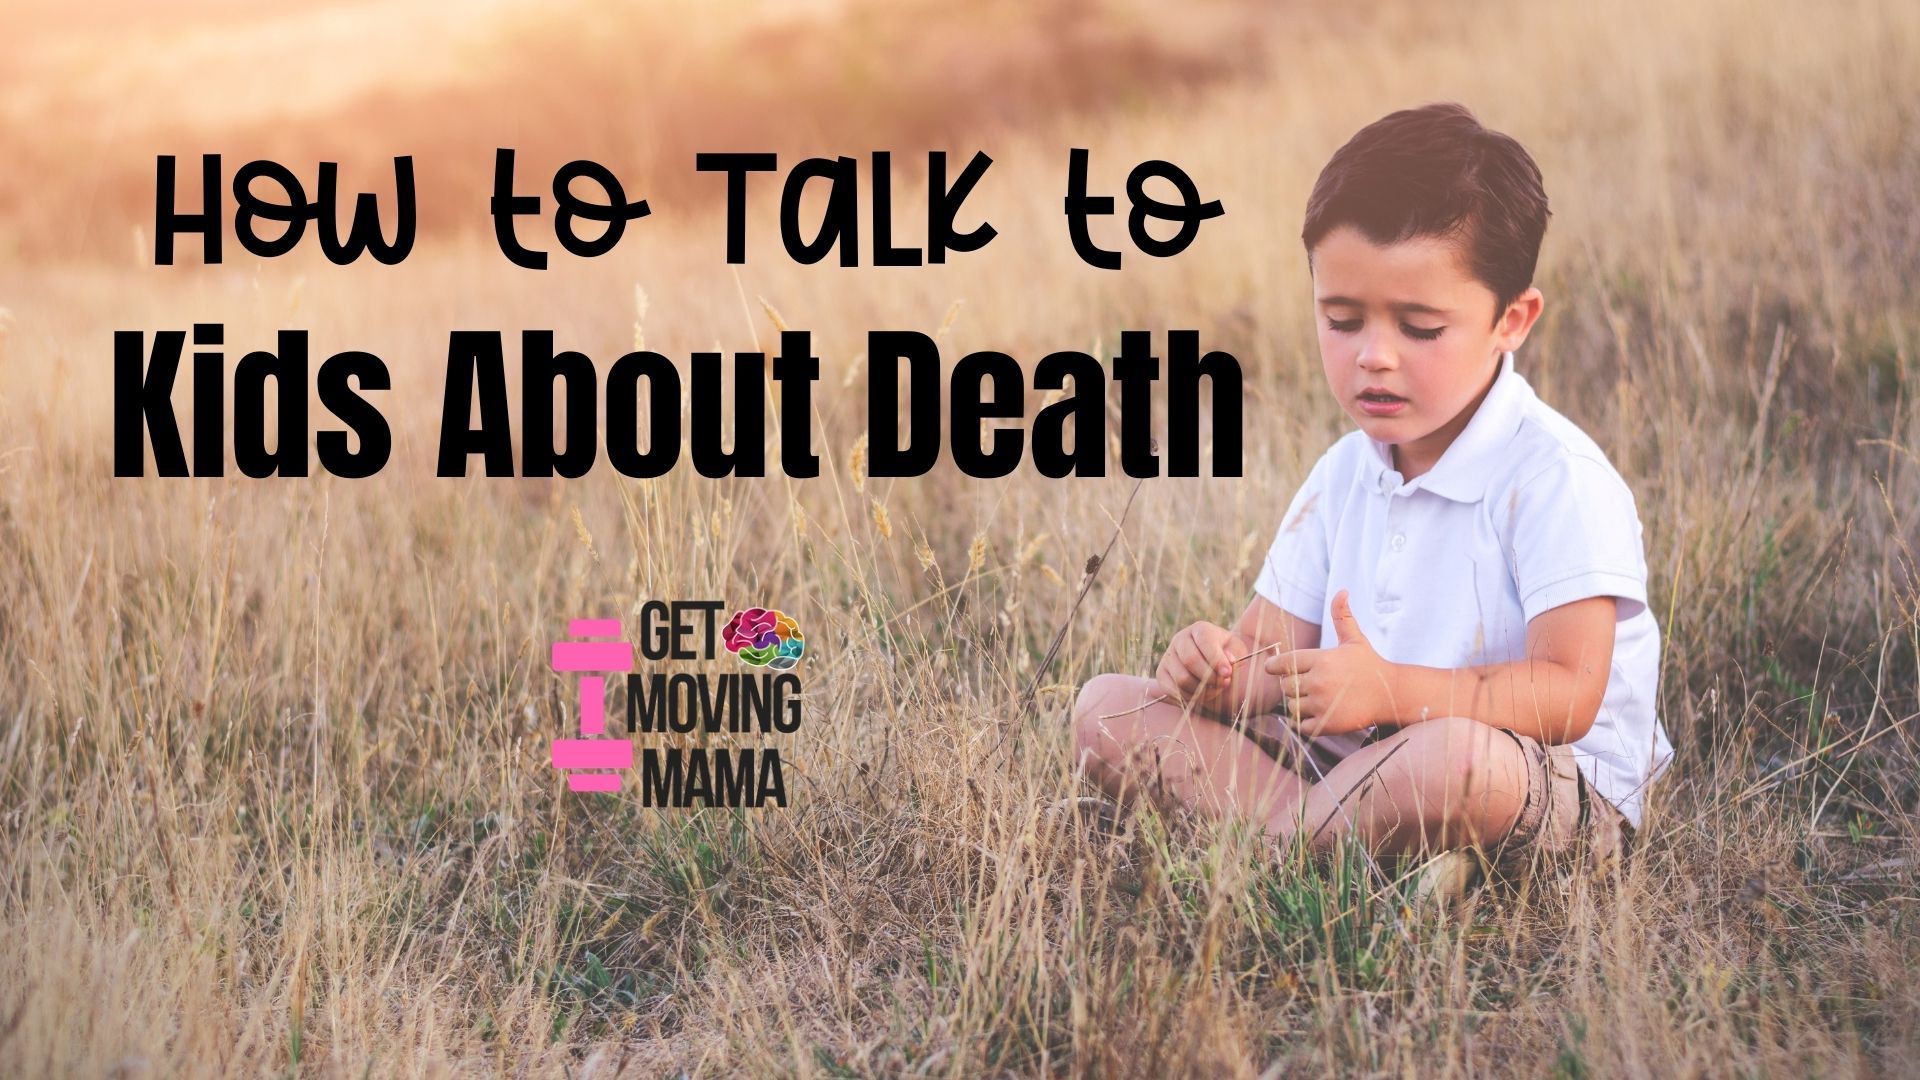 A picture of a boy sitting alone in a field with "how to talk to kids about death" in black text.